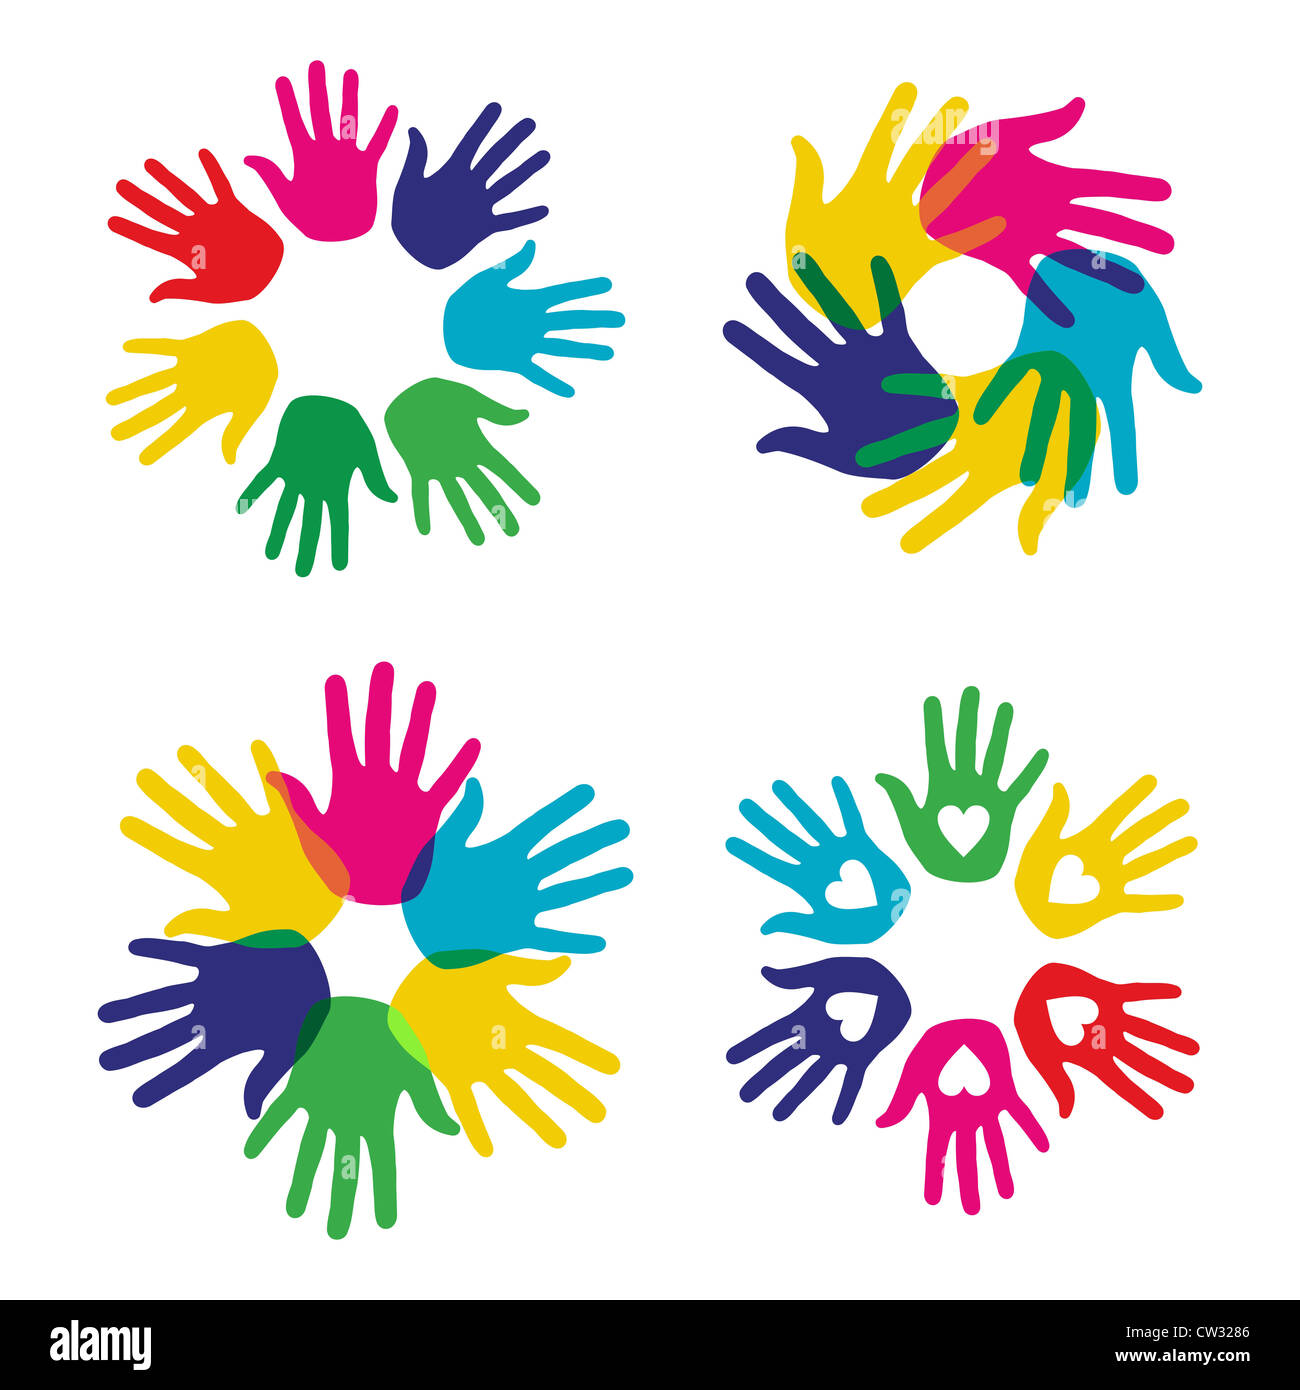 Multicolor creative diversity hands symbols set. Vector illustration layered for easy manipulation and custom coloring. Stock Photo